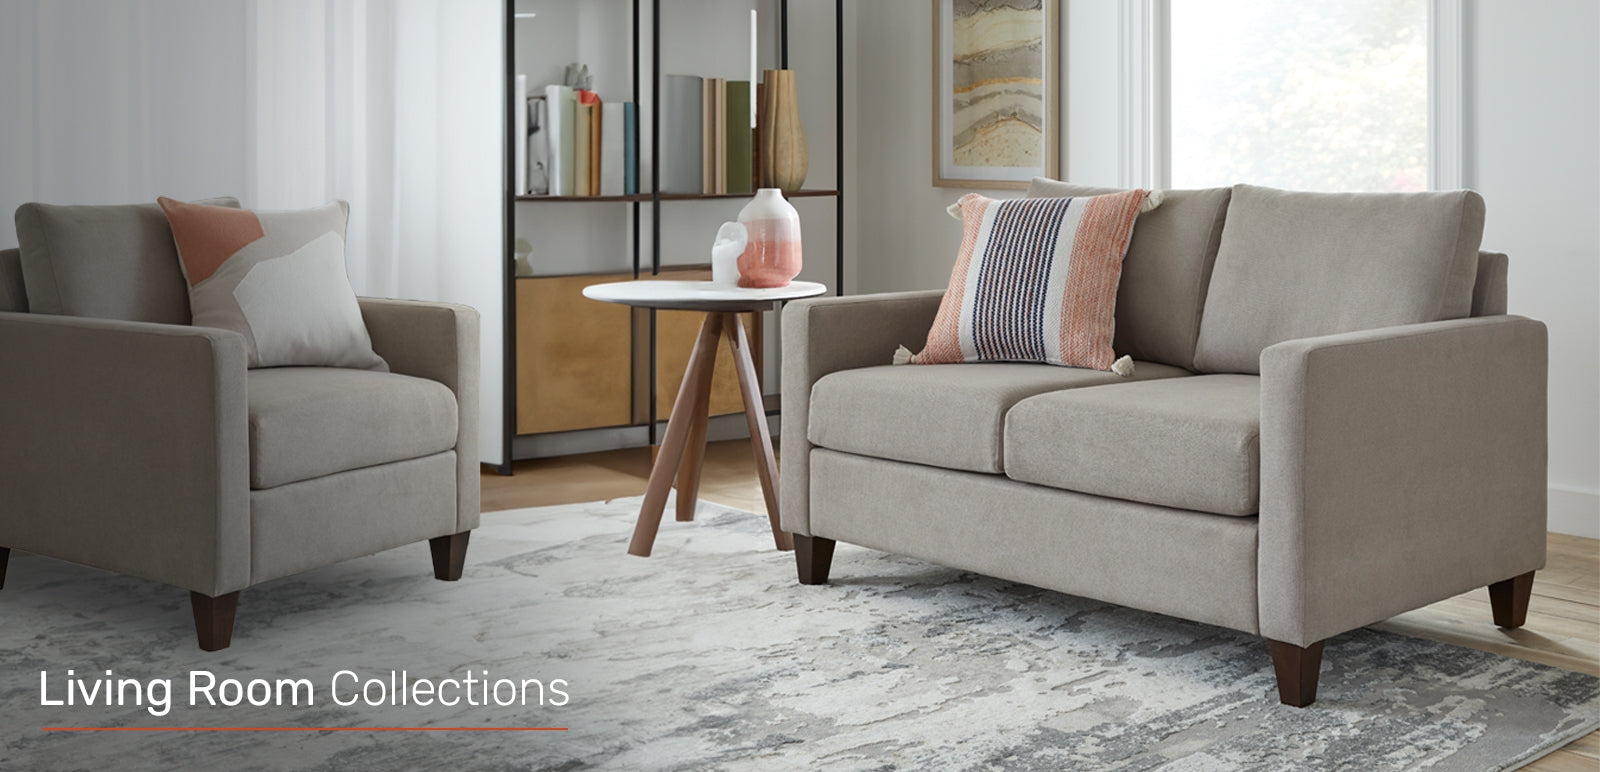 Living-Room-Collections_Header-image